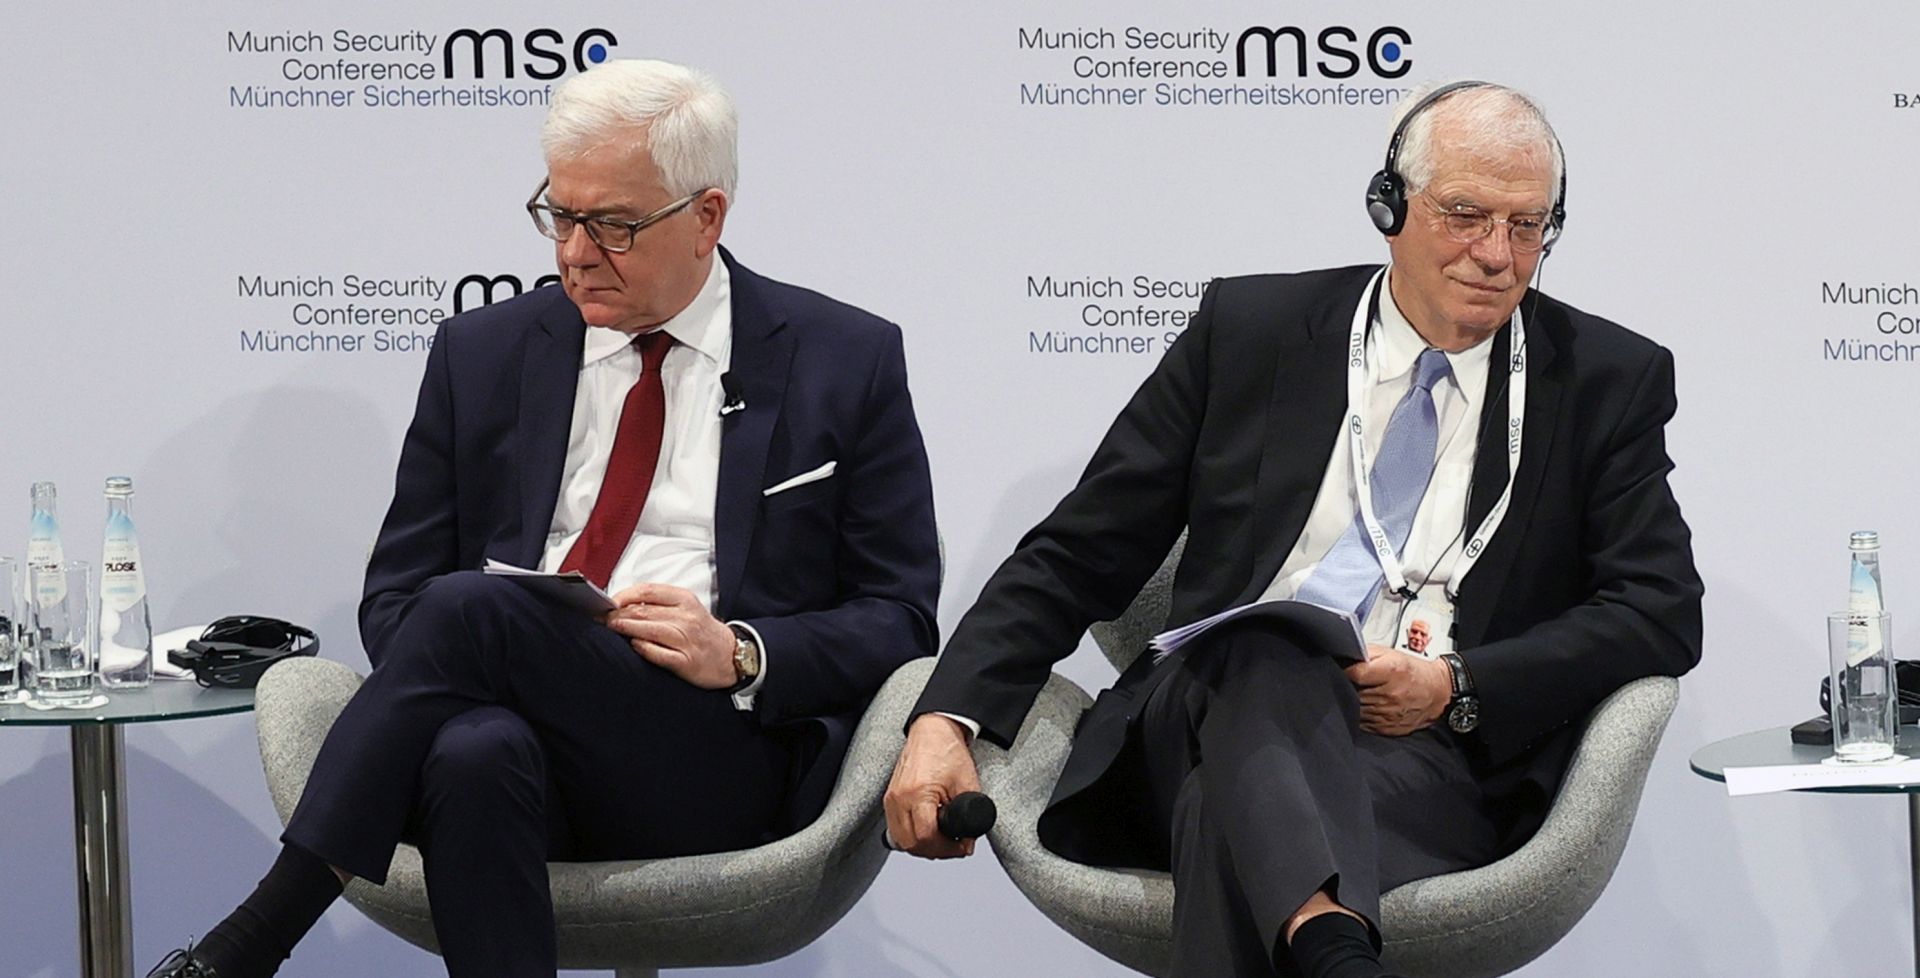 epa08221460 Poland's Foreign Minister Jacek Czaputowicz (L) and EU Foreign Policy Chief Josep Borrell (R) during a Panel Discussion 'Eurovision Contest: A Europe That Projects' at the 56th Munich Security Conference (MSC) in Munich, Germany, 16 February 2020. More than 500 high-level international decision-makers meet at the 56th Munich Security Conference in Munich during their annual meeting from 14 to 16 February 2020 to discuss global security issues.  EPA/RONALD WITTEK